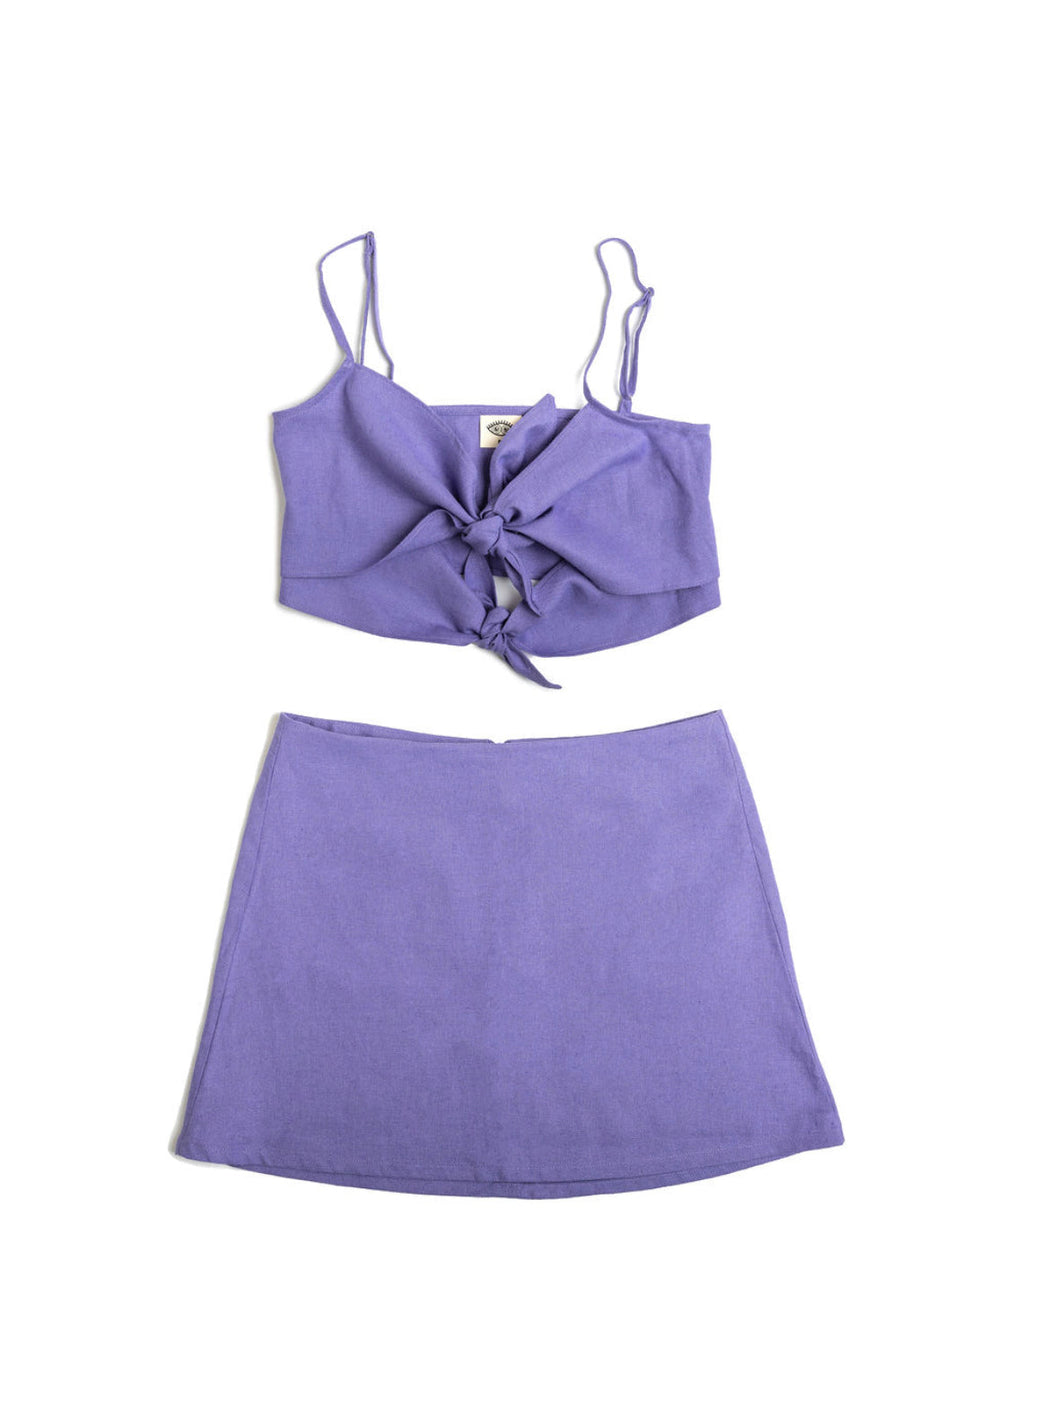 sustainable linen outfit - lilac